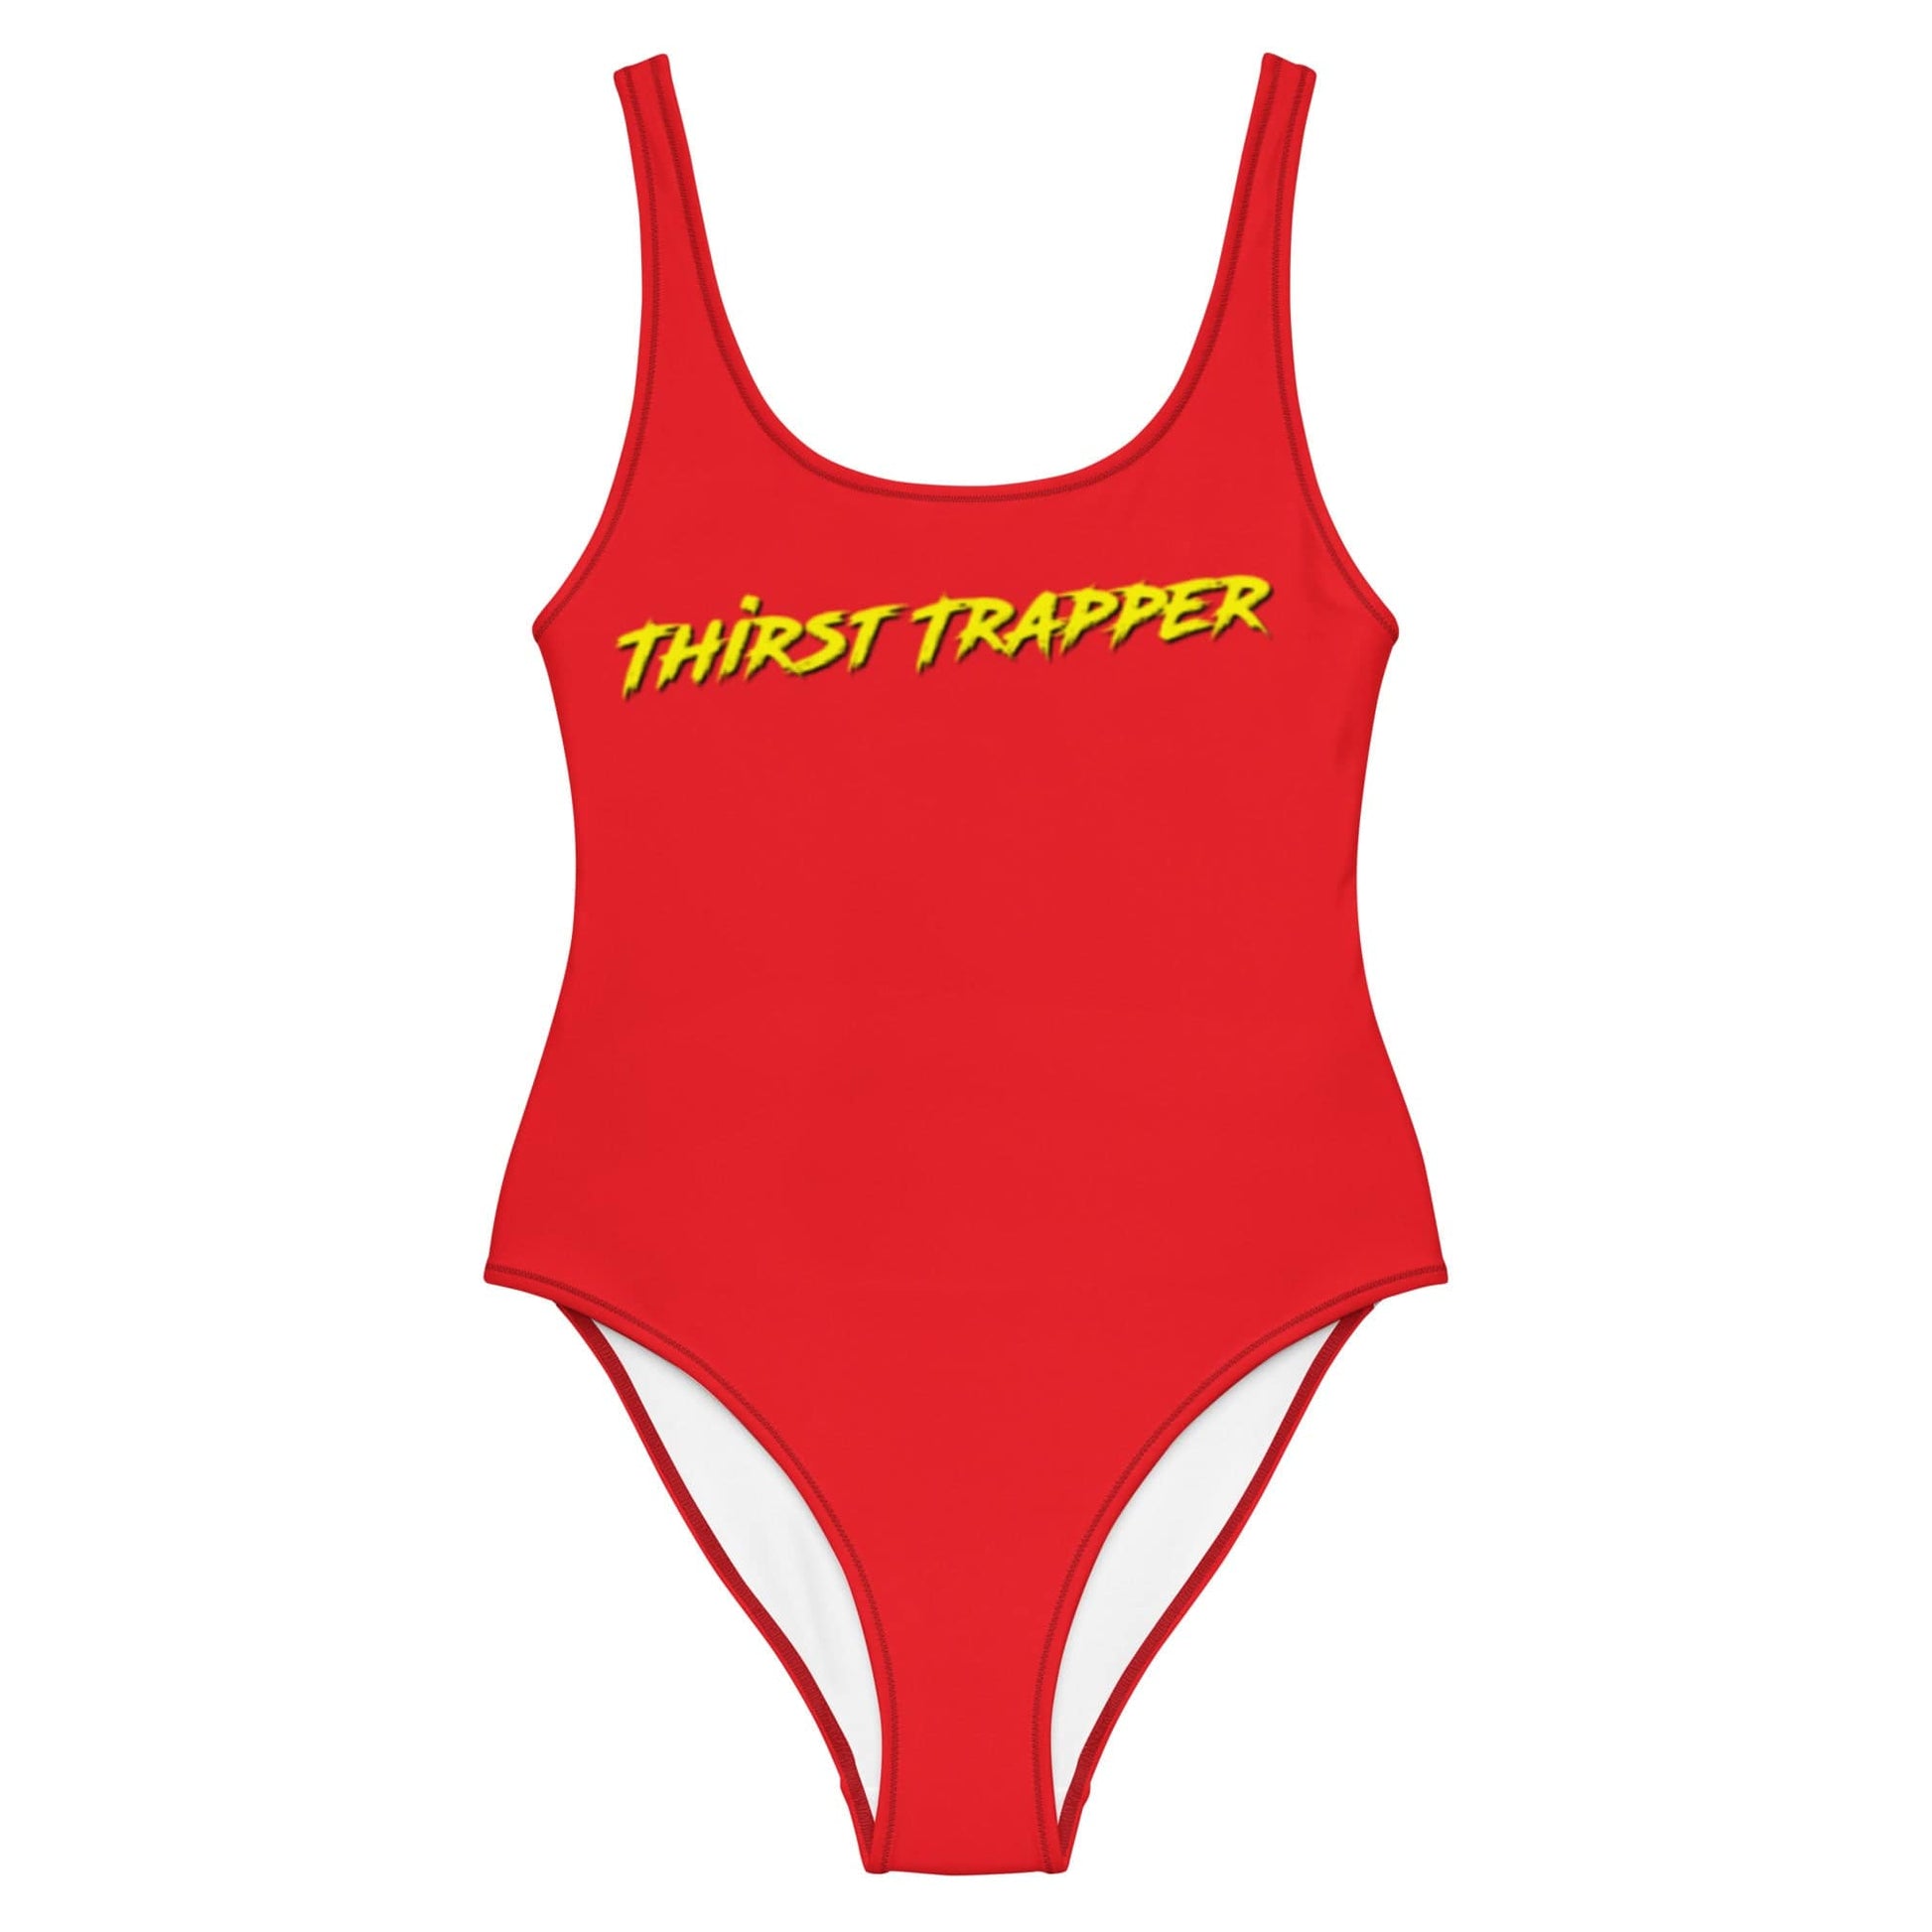 Unleash Your Thirst Trapper Style in the Hottest Lifeguard Swimsuit ...